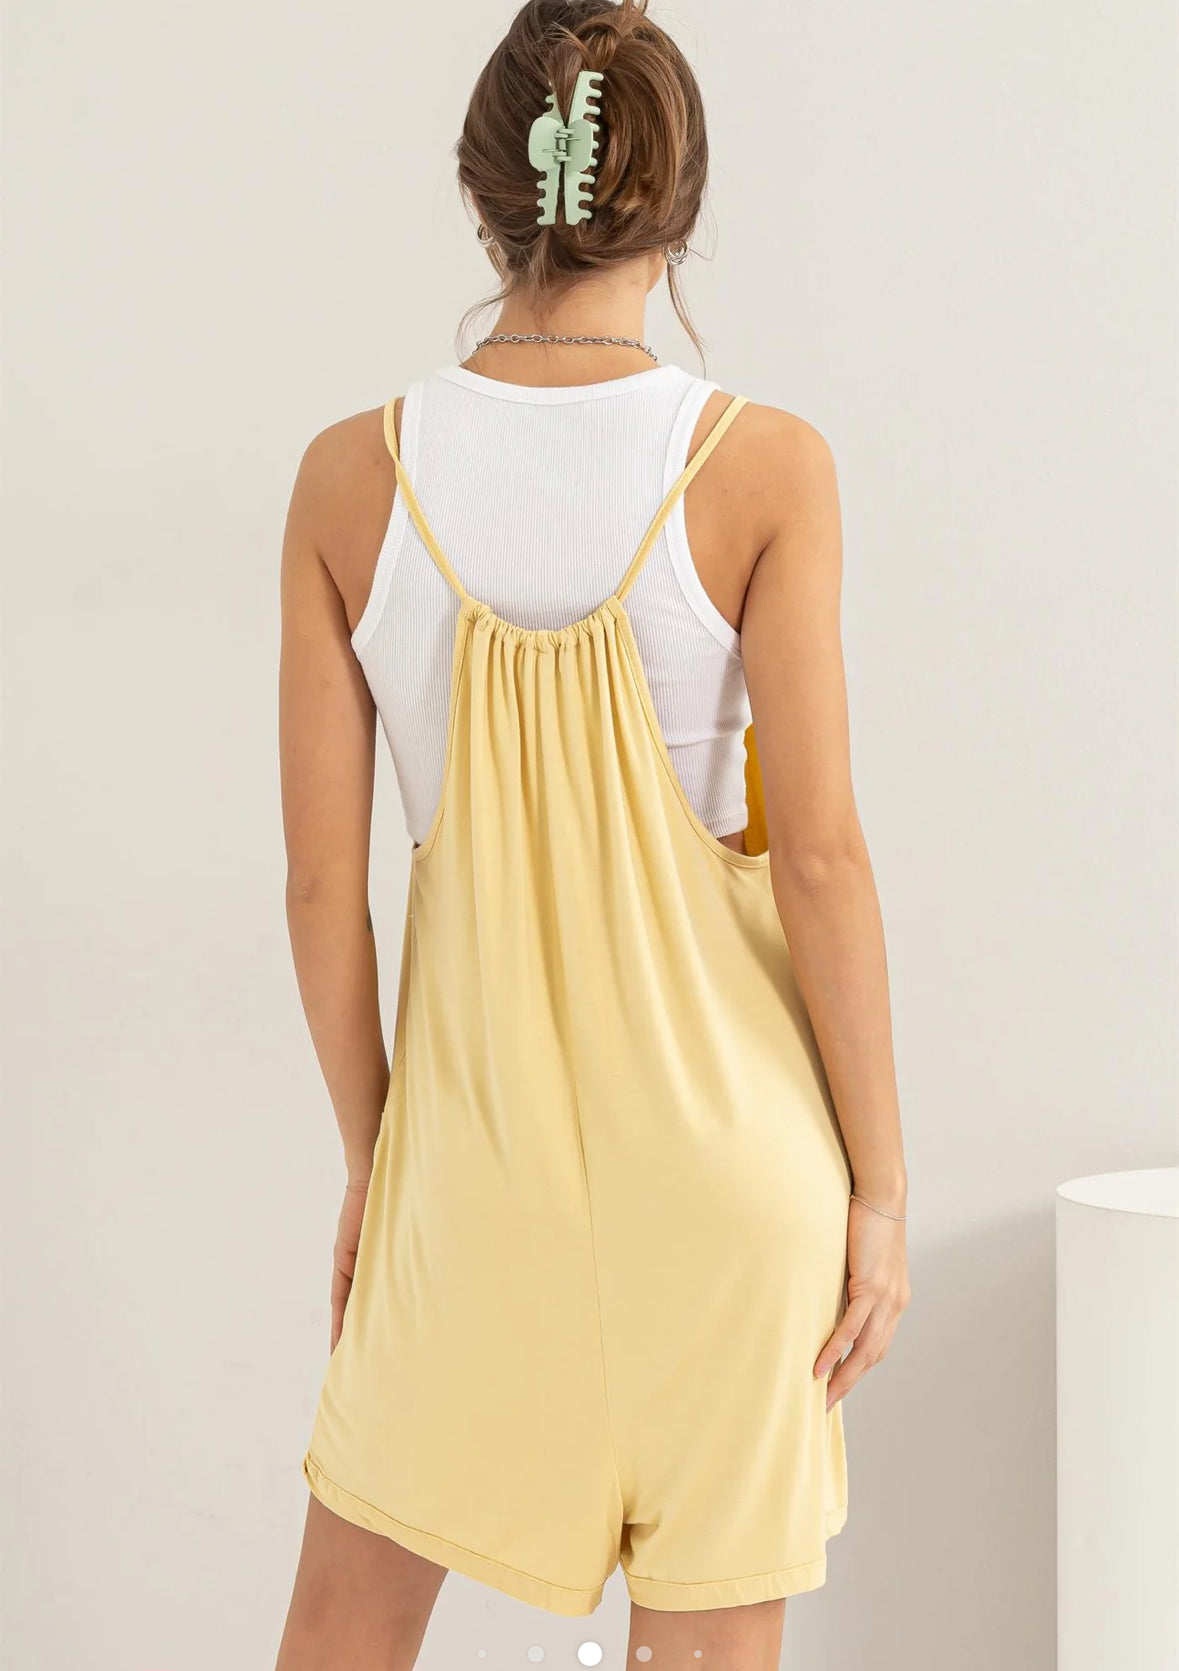 back view of Sunshine Romper in soft jersey with scoop neck, spaghetti shoulder straps, and front patch pockets. Relaxed fit for comfortable wear.